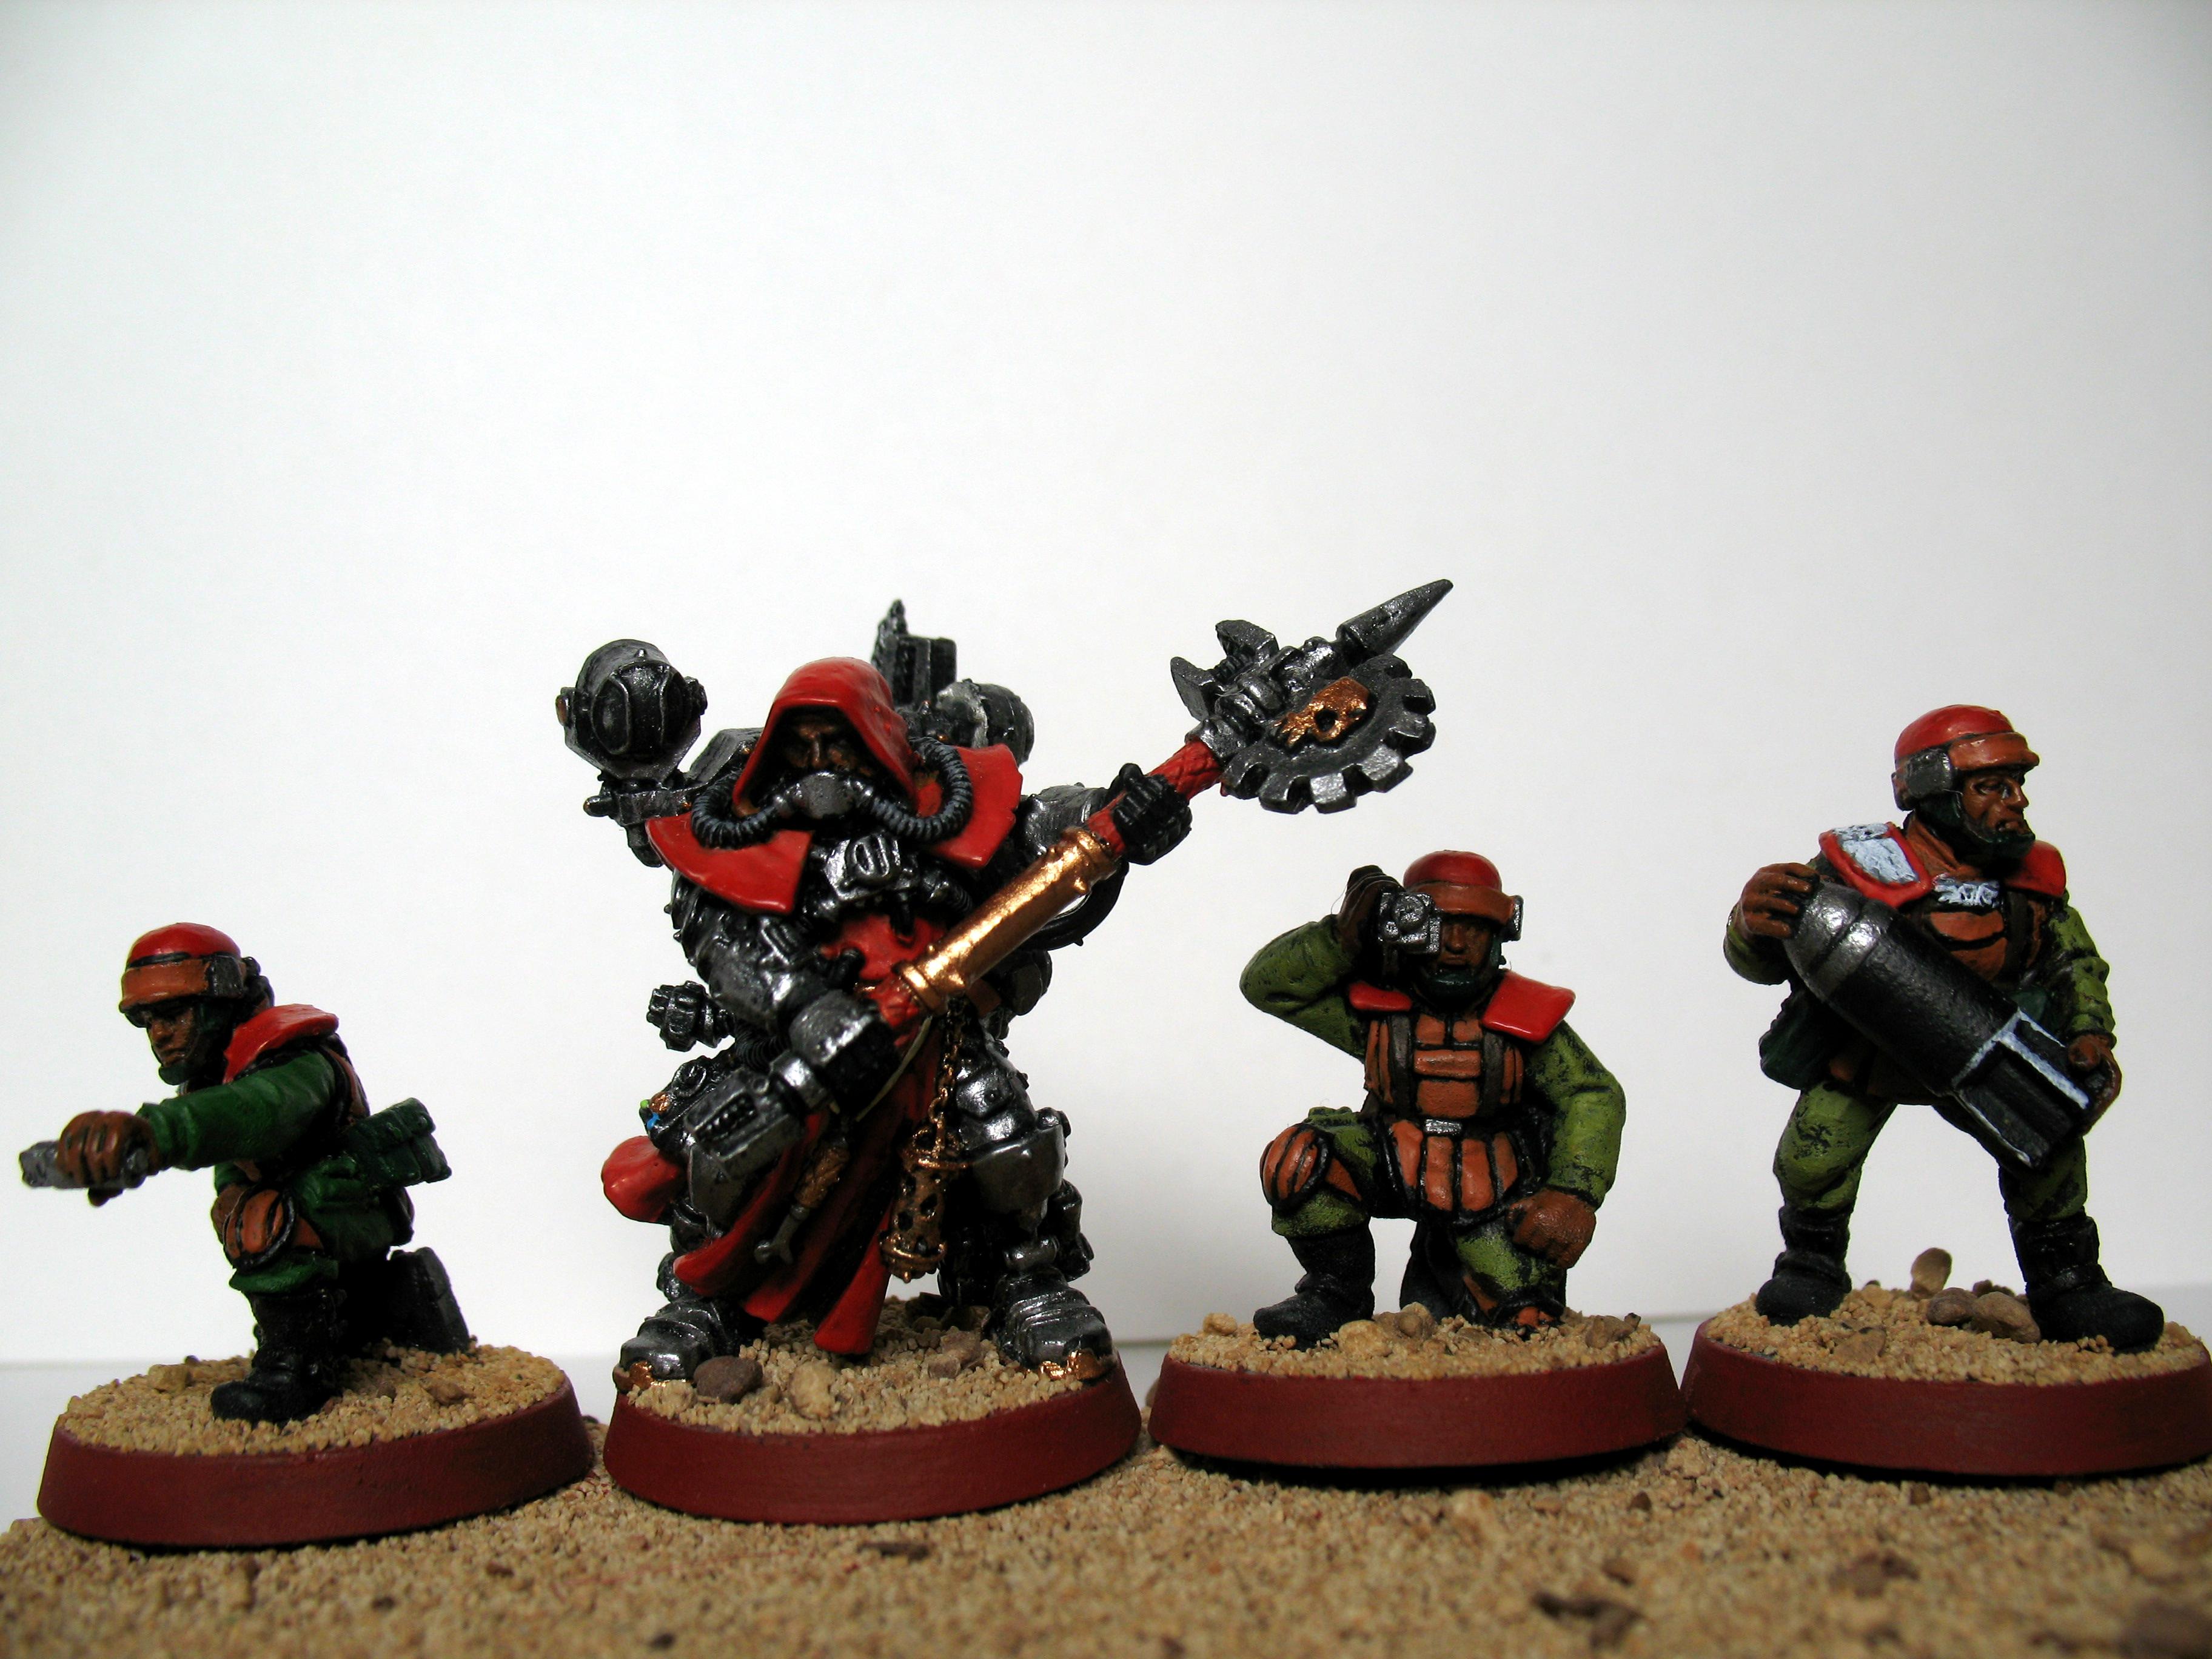 11th, 11th Cadian, Assault, Cadians, Enginseer, Imperial Guard, Servitors, Techpriest